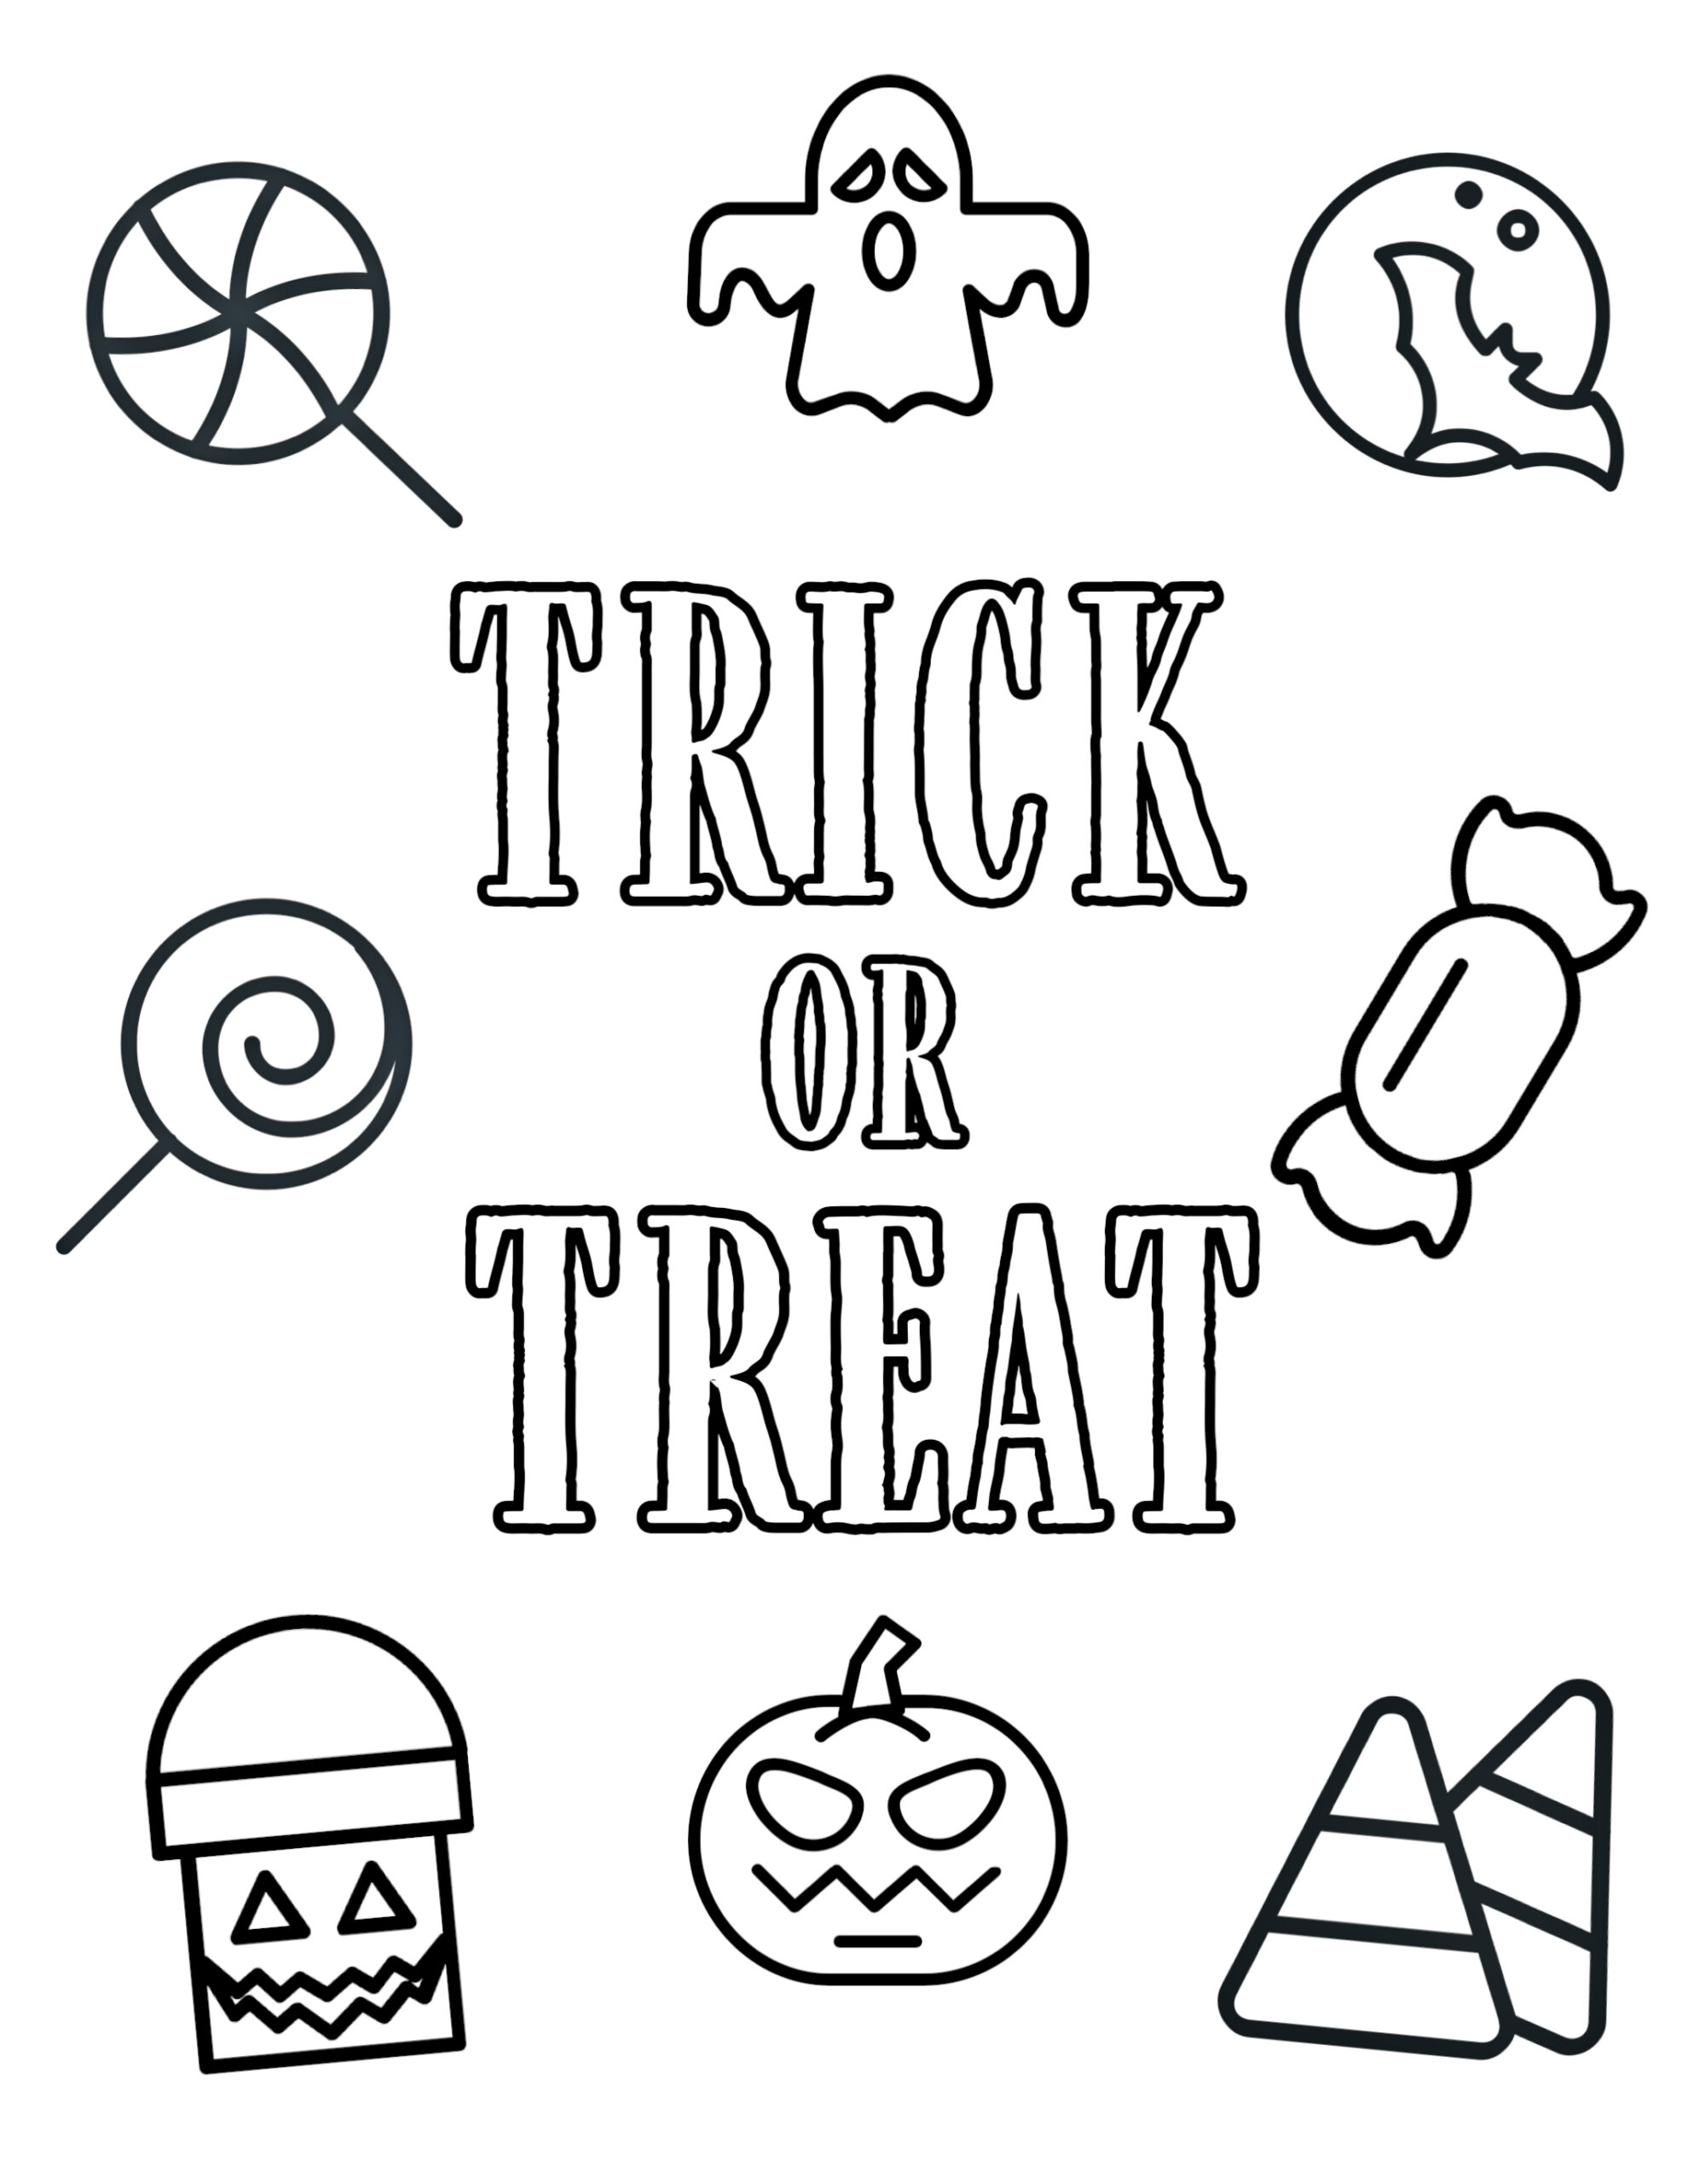 Download Free Printable Halloween Coloring Pages Paper Trail Design